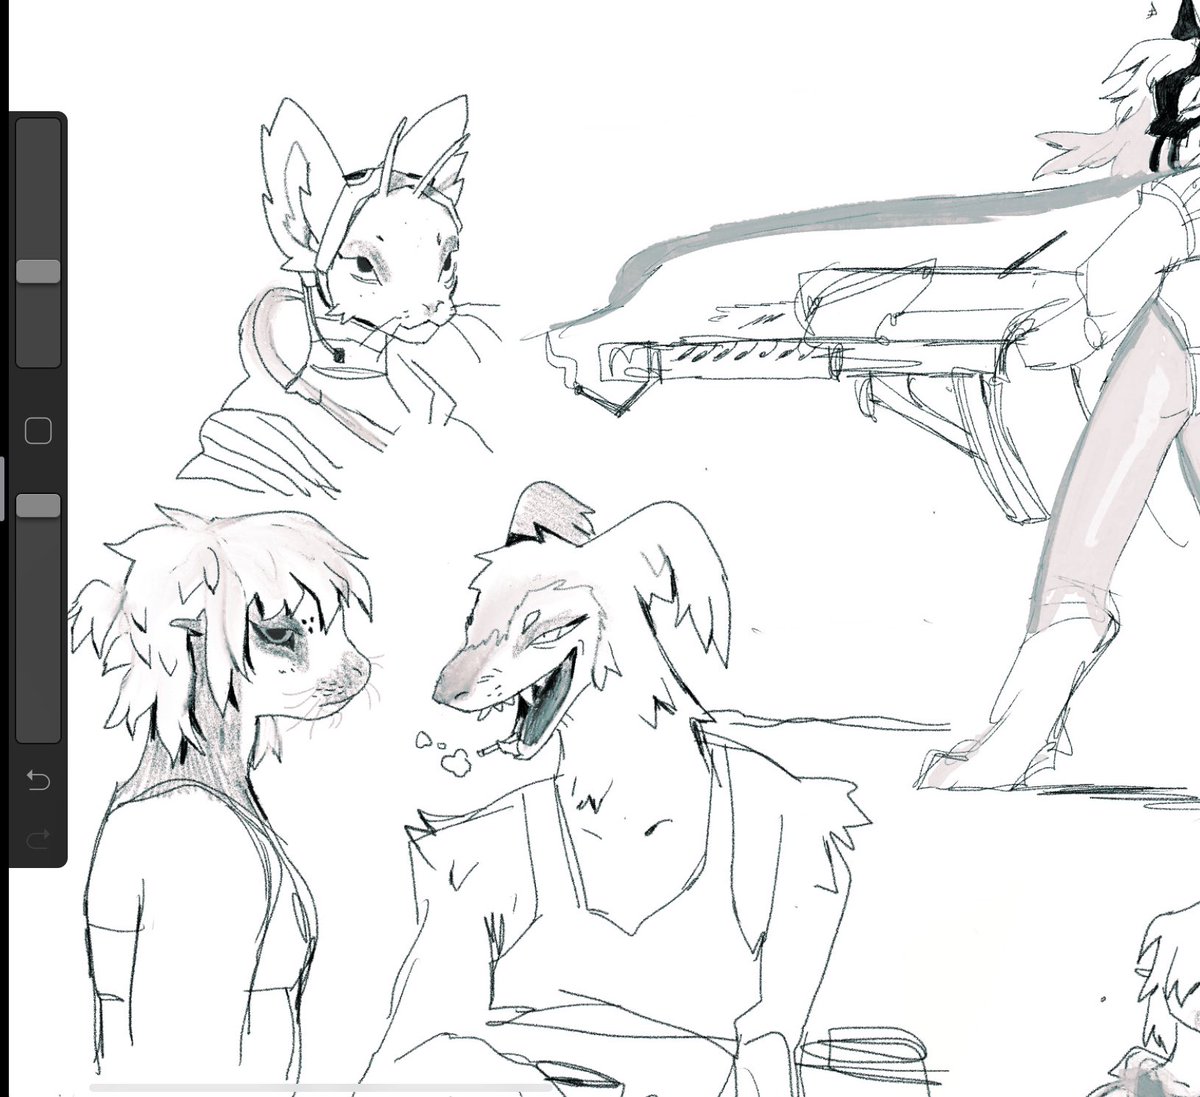 just some funny little oc doodles. sci-fi furry world 